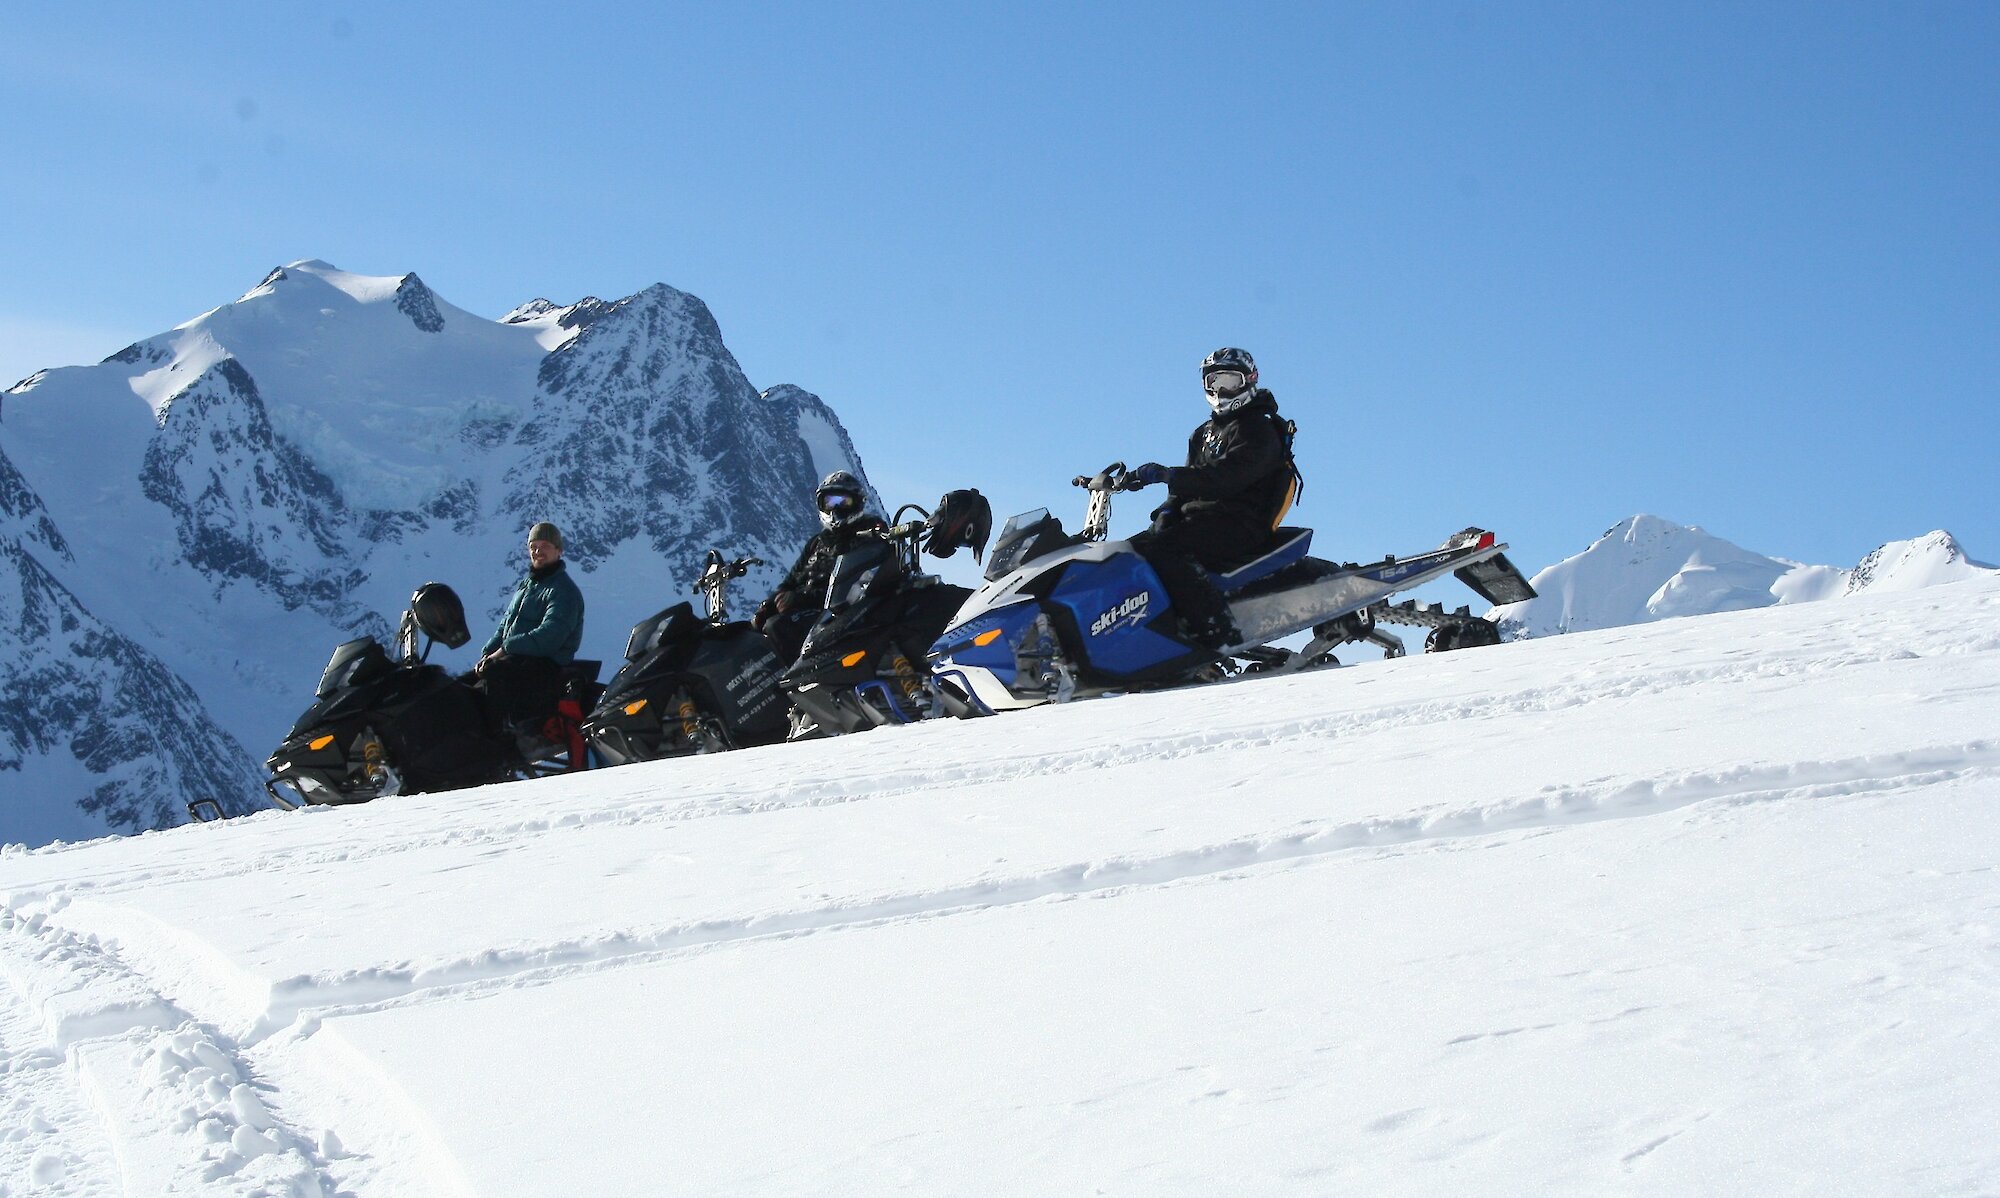 People driving snowmobiles on a bluebird day at Kicking Horse Mountain